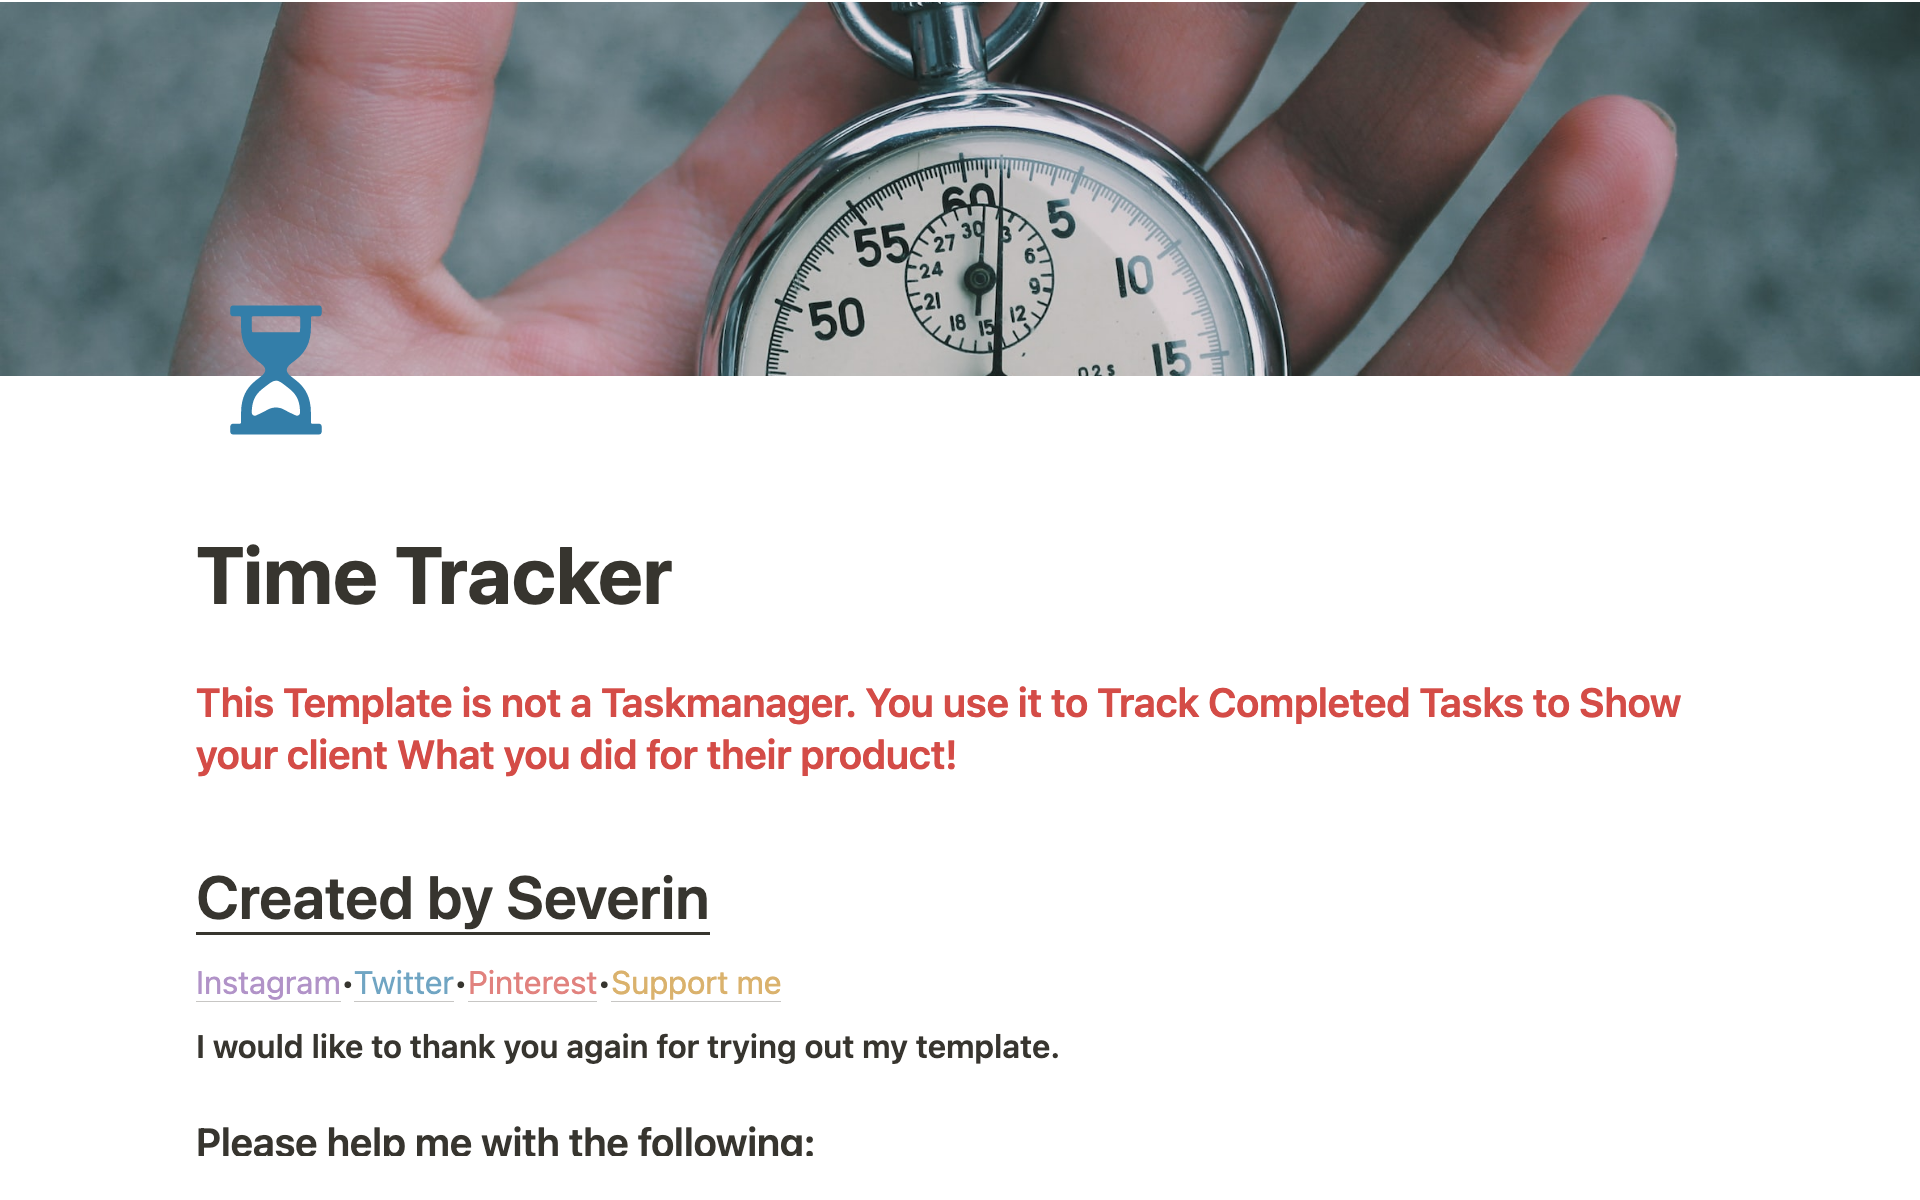 Time Tracker is an automated template that allows you to track your time so that your projects are financially profitable.